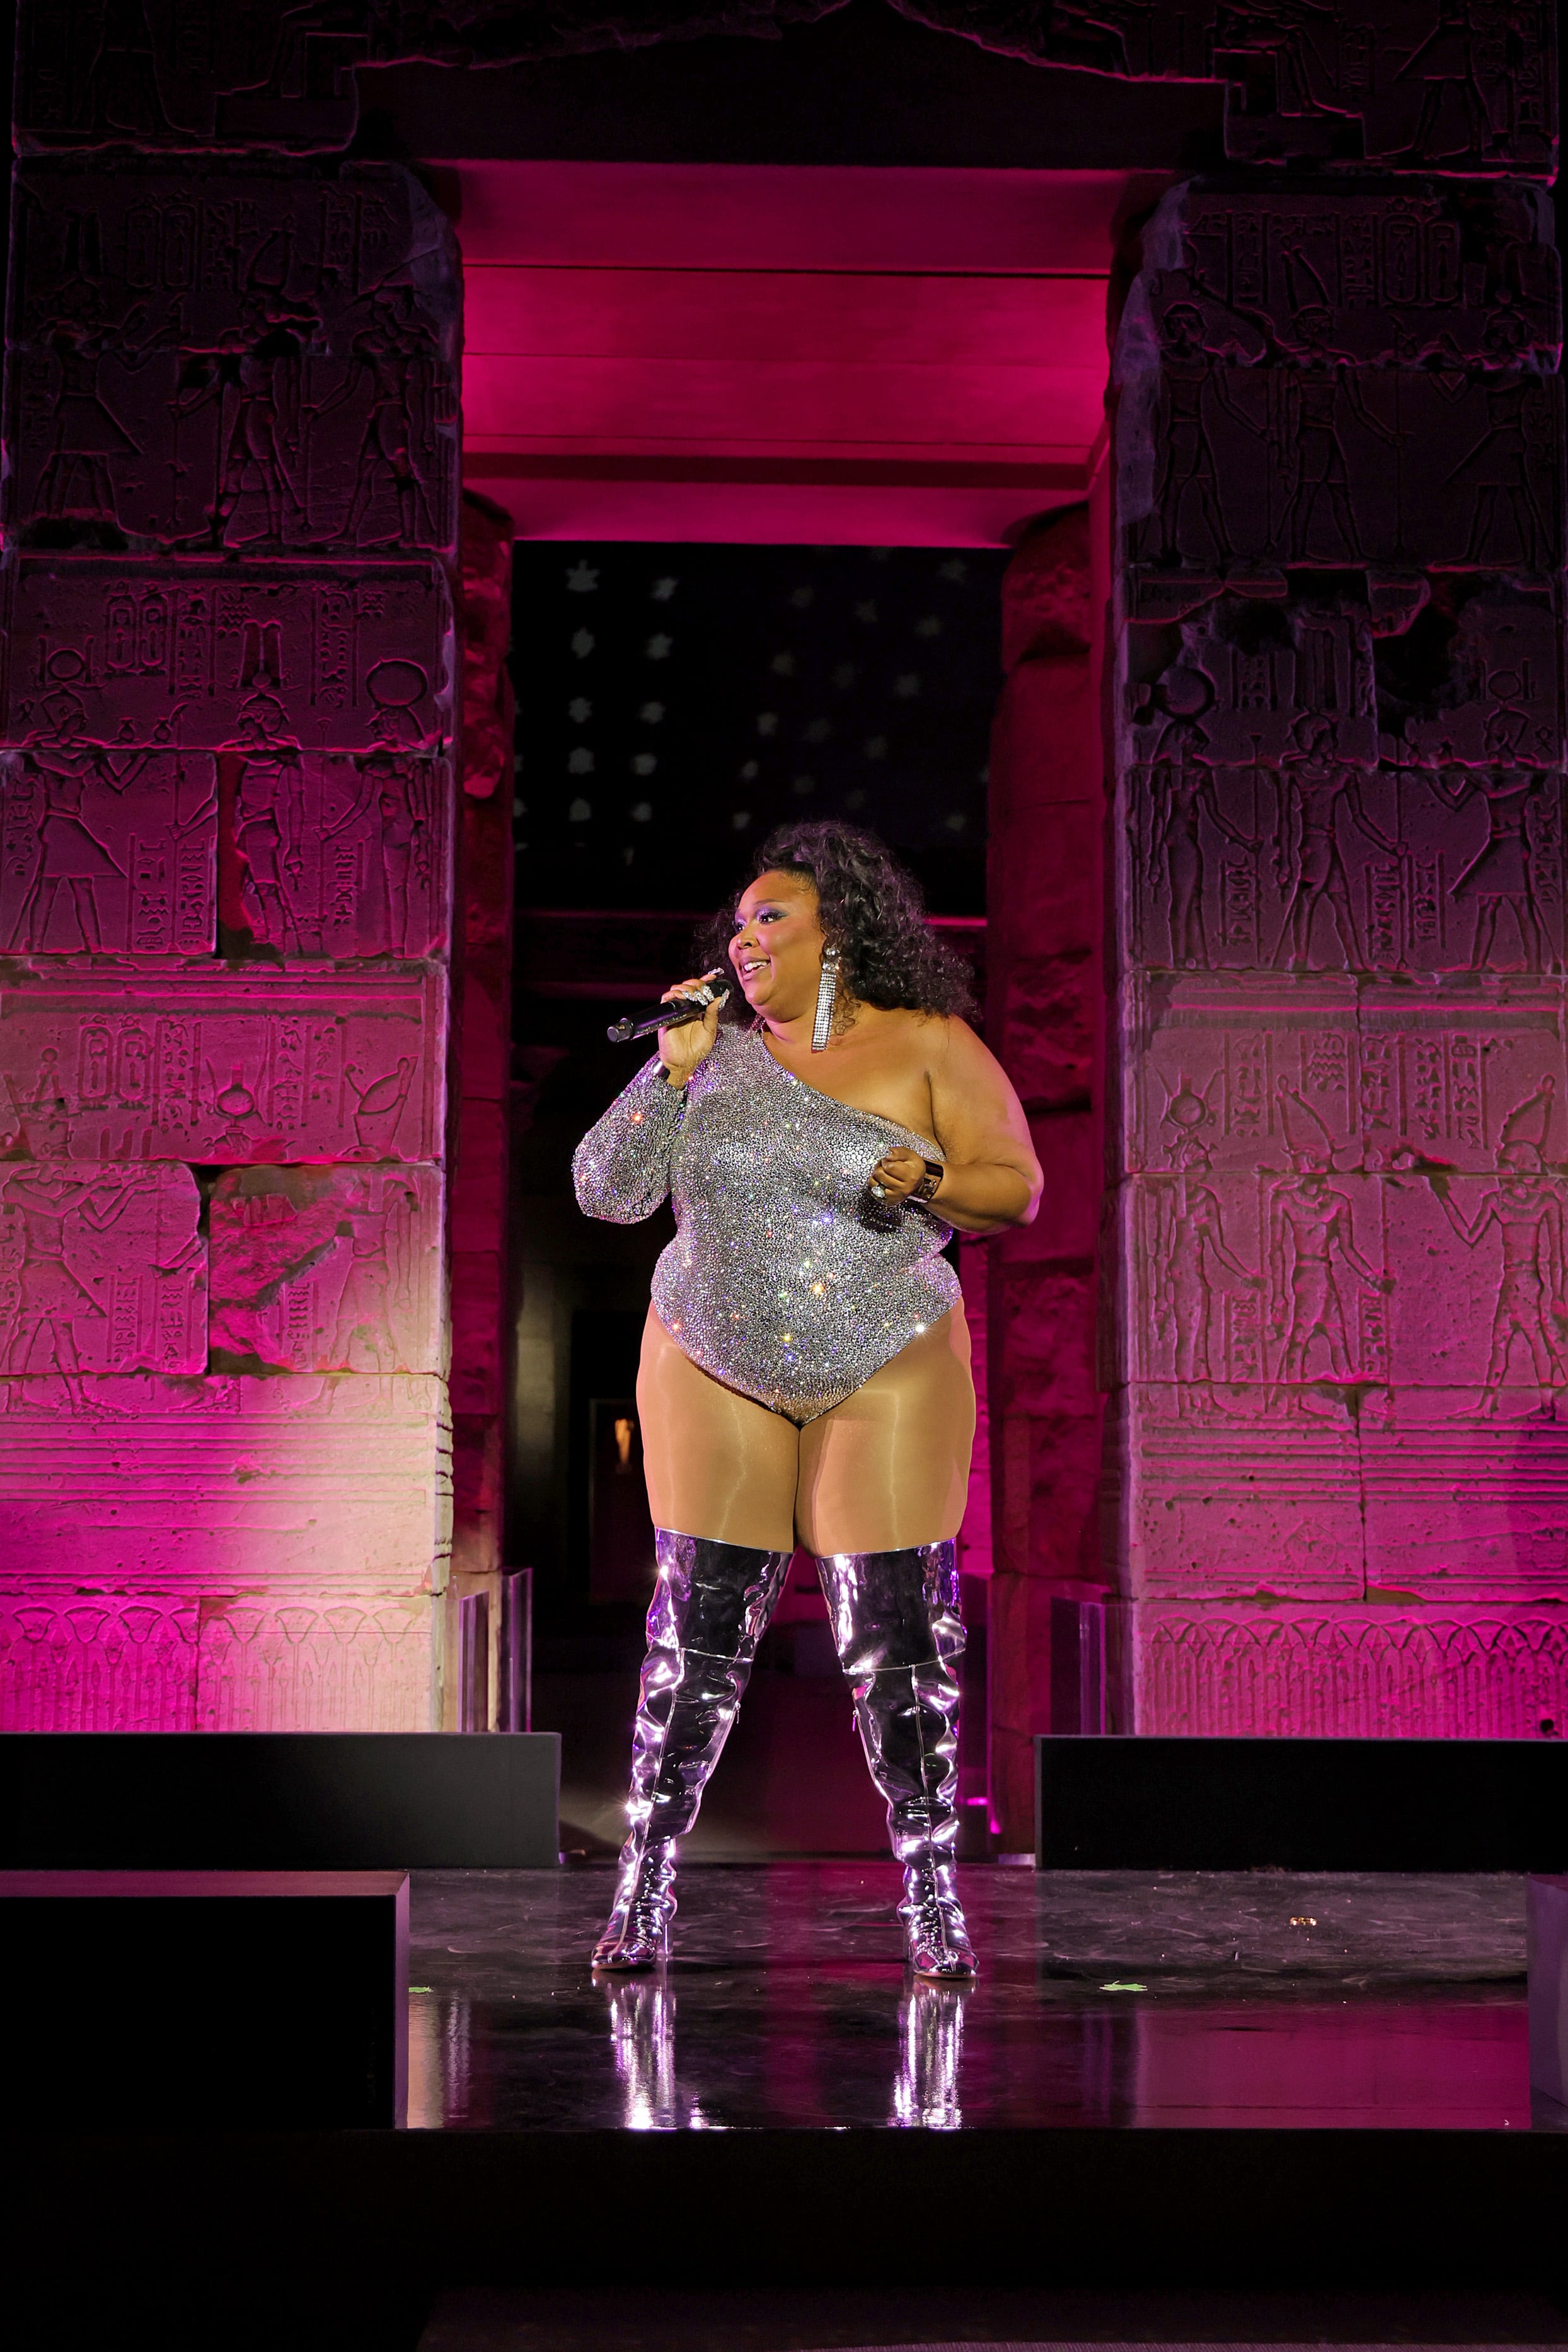 Lizzo's inclusive brand Yitty drops its first loungewear collection